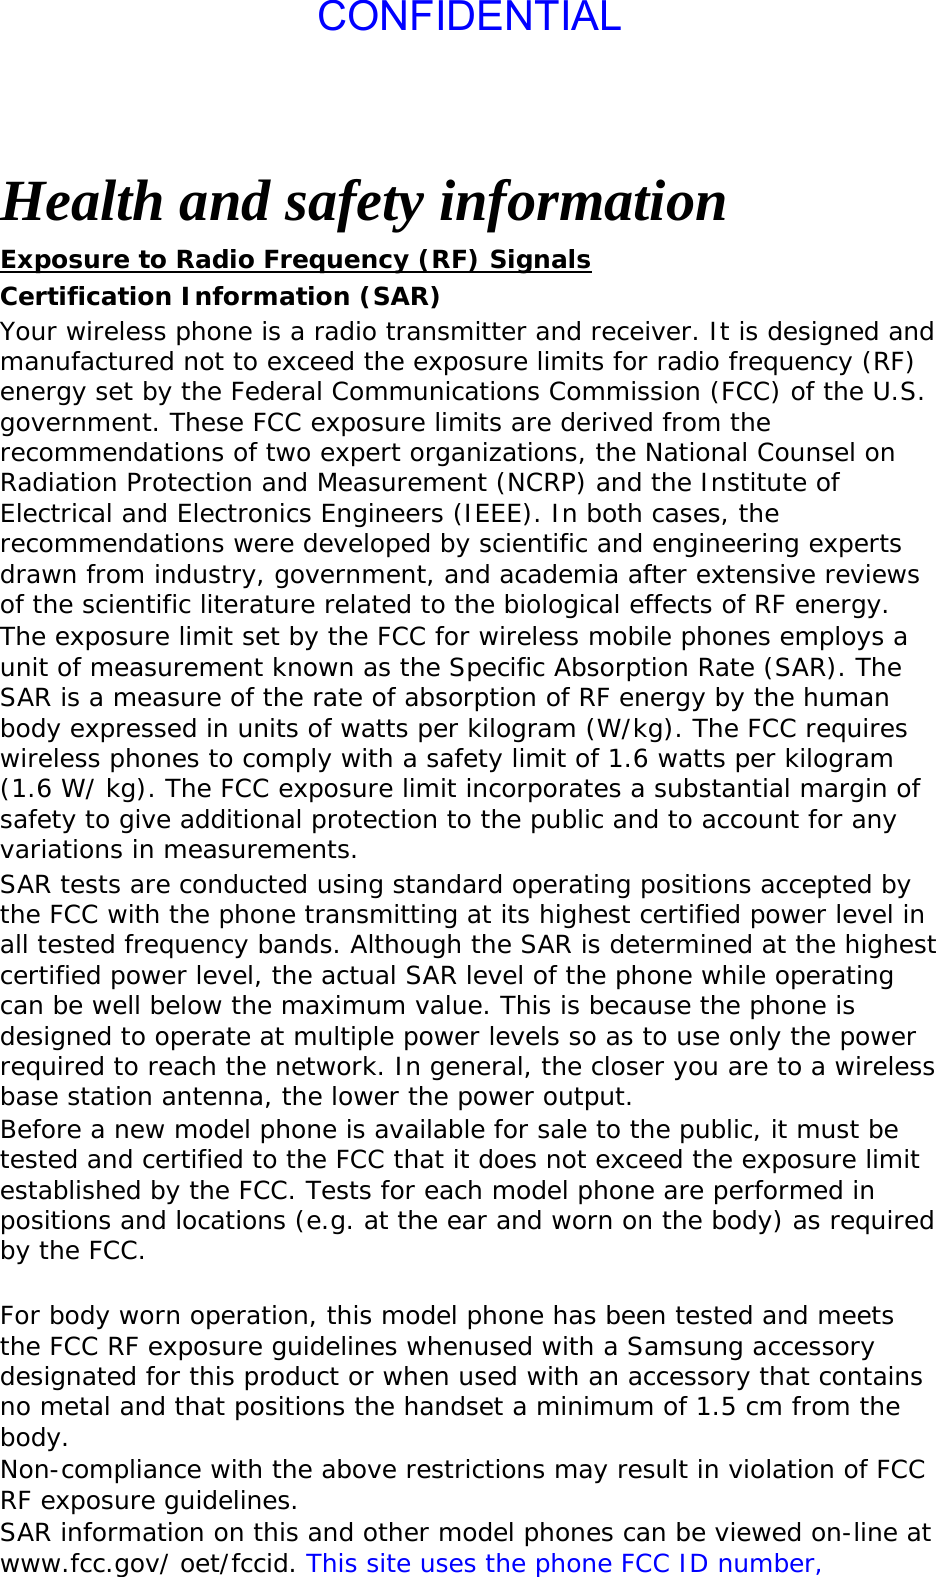 CONFIDENTIALHealth and safety information Exposure to Radio Frequency (RF) Signals Certification Information (SAR) Your wireless phone is a radio transmitter and receiver. It is designed and manufactured not to exceed the exposure limits for radio frequency (RF) energy set by the Federal Communications Commission (FCC) of the U.S. government. These FCC exposure limits are derived from the recommendations of two expert organizations, the National Counsel on Radiation Protection and Measurement (NCRP) and the Institute of Electrical and Electronics Engineers (IEEE). In both cases, the recommendations were developed by scientific and engineering experts drawn from industry, government, and academia after extensive reviews of the scientific literature related to the biological effects of RF energy. The exposure limit set by the FCC for wireless mobile phones employs a unit of measurement known as the Specific Absorption Rate (SAR). The SAR is a measure of the rate of absorption of RF energy by the human body expressed in units of watts per kilogram (W/kg). The FCC requires wireless phones to comply with a safety limit of 1.6 watts per kilogram (1.6 W/ kg). The FCC exposure limit incorporates a substantial margin of safety to give additional protection to the public and to account for any variations in measurements. SAR tests are conducted using standard operating positions accepted by the FCC with the phone transmitting at its highest certified power level in all tested frequency bands. Although the SAR is determined at the highest certified power level, the actual SAR level of the phone while operating can be well below the maximum value. This is because the phone is designed to operate at multiple power levels so as to use only the power required to reach the network. In general, the closer you are to a wireless base station antenna, the lower the power output. Before a new model phone is available for sale to the public, it must be tested and certified to the FCC that it does not exceed the exposure limit established by the FCC. Tests for each model phone are performed in positions and locations (e.g. at the ear and worn on the body) as required by the FCC.    For body worn operation, this model phone has been tested and meets the FCC RF exposure guidelines whenused with a Samsung accessory designated for this product or when used with an accessory that contains no metal and that positions the handset a minimum of 1.5 cm from the body.  Non-compliance with the above restrictions may result in violation of FCC RF exposure guidelines. SAR information on this and other model phones can be viewed on-line at www.fcc.gov/ oet/fccid. This site uses the phone FCC ID number, 